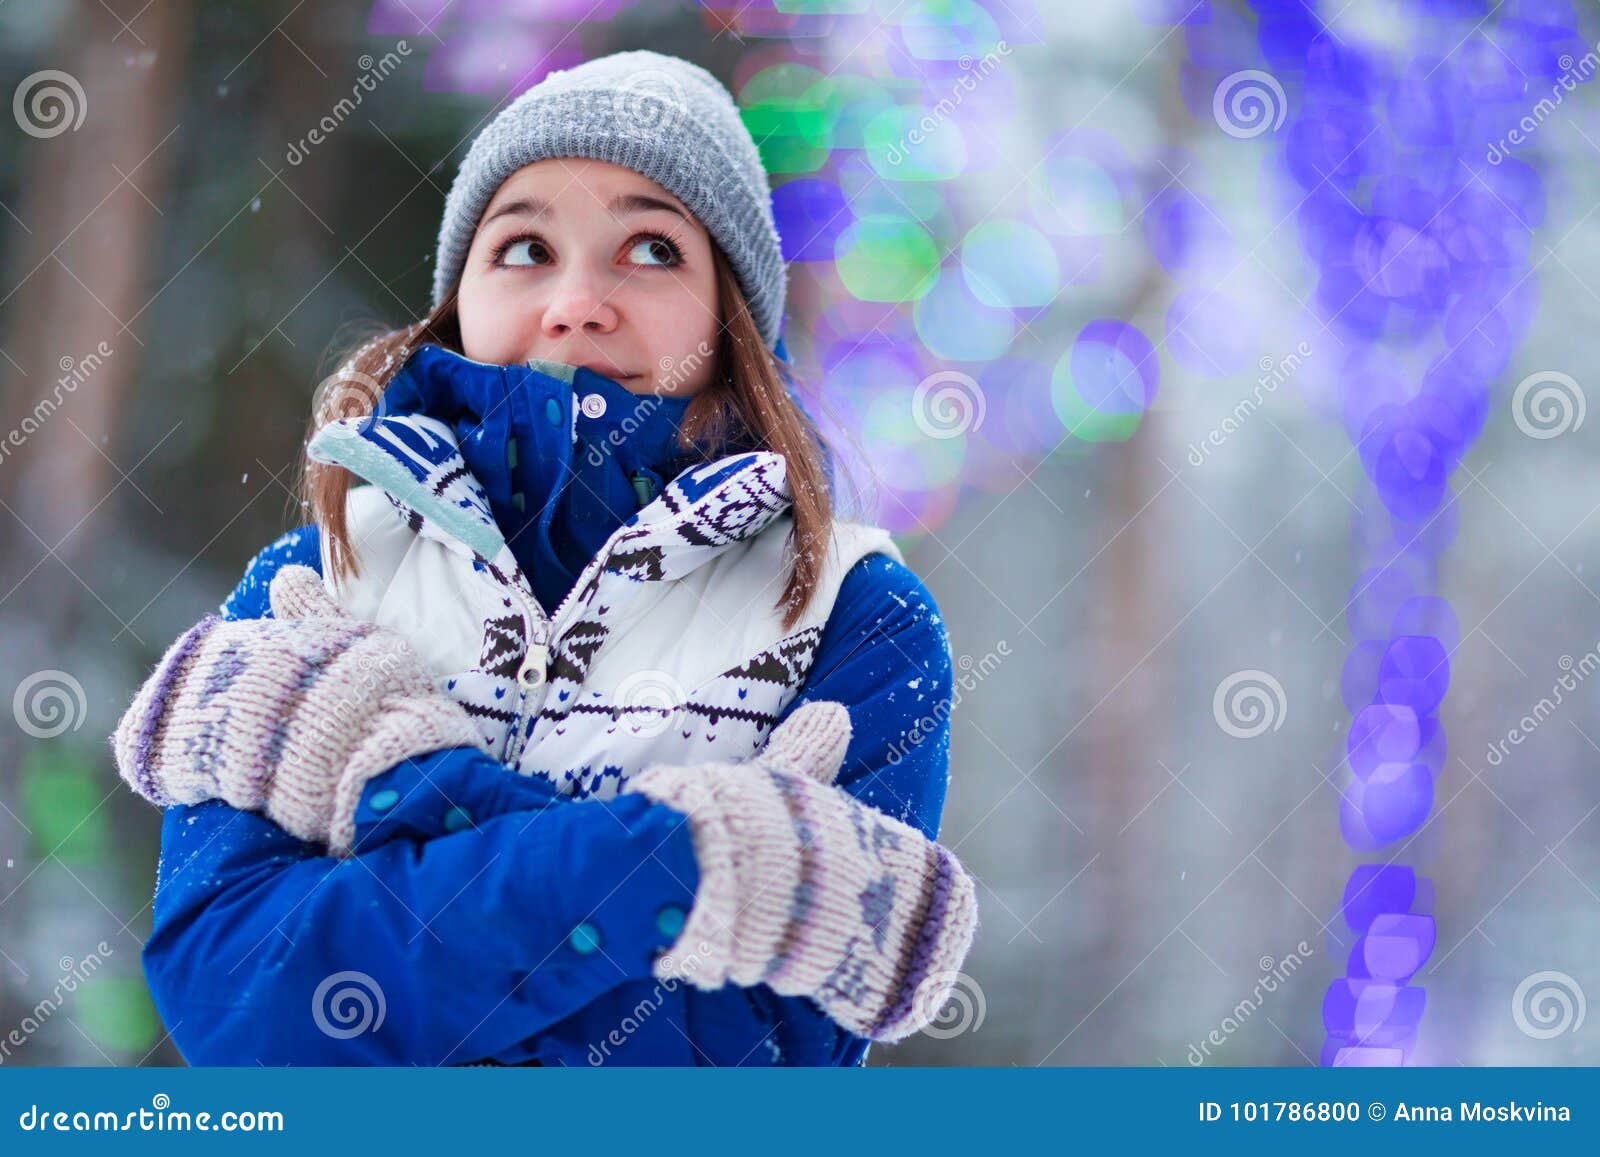 Happy Winter Women in Park Snow Christmas Lights Stock Photo - Image of ...